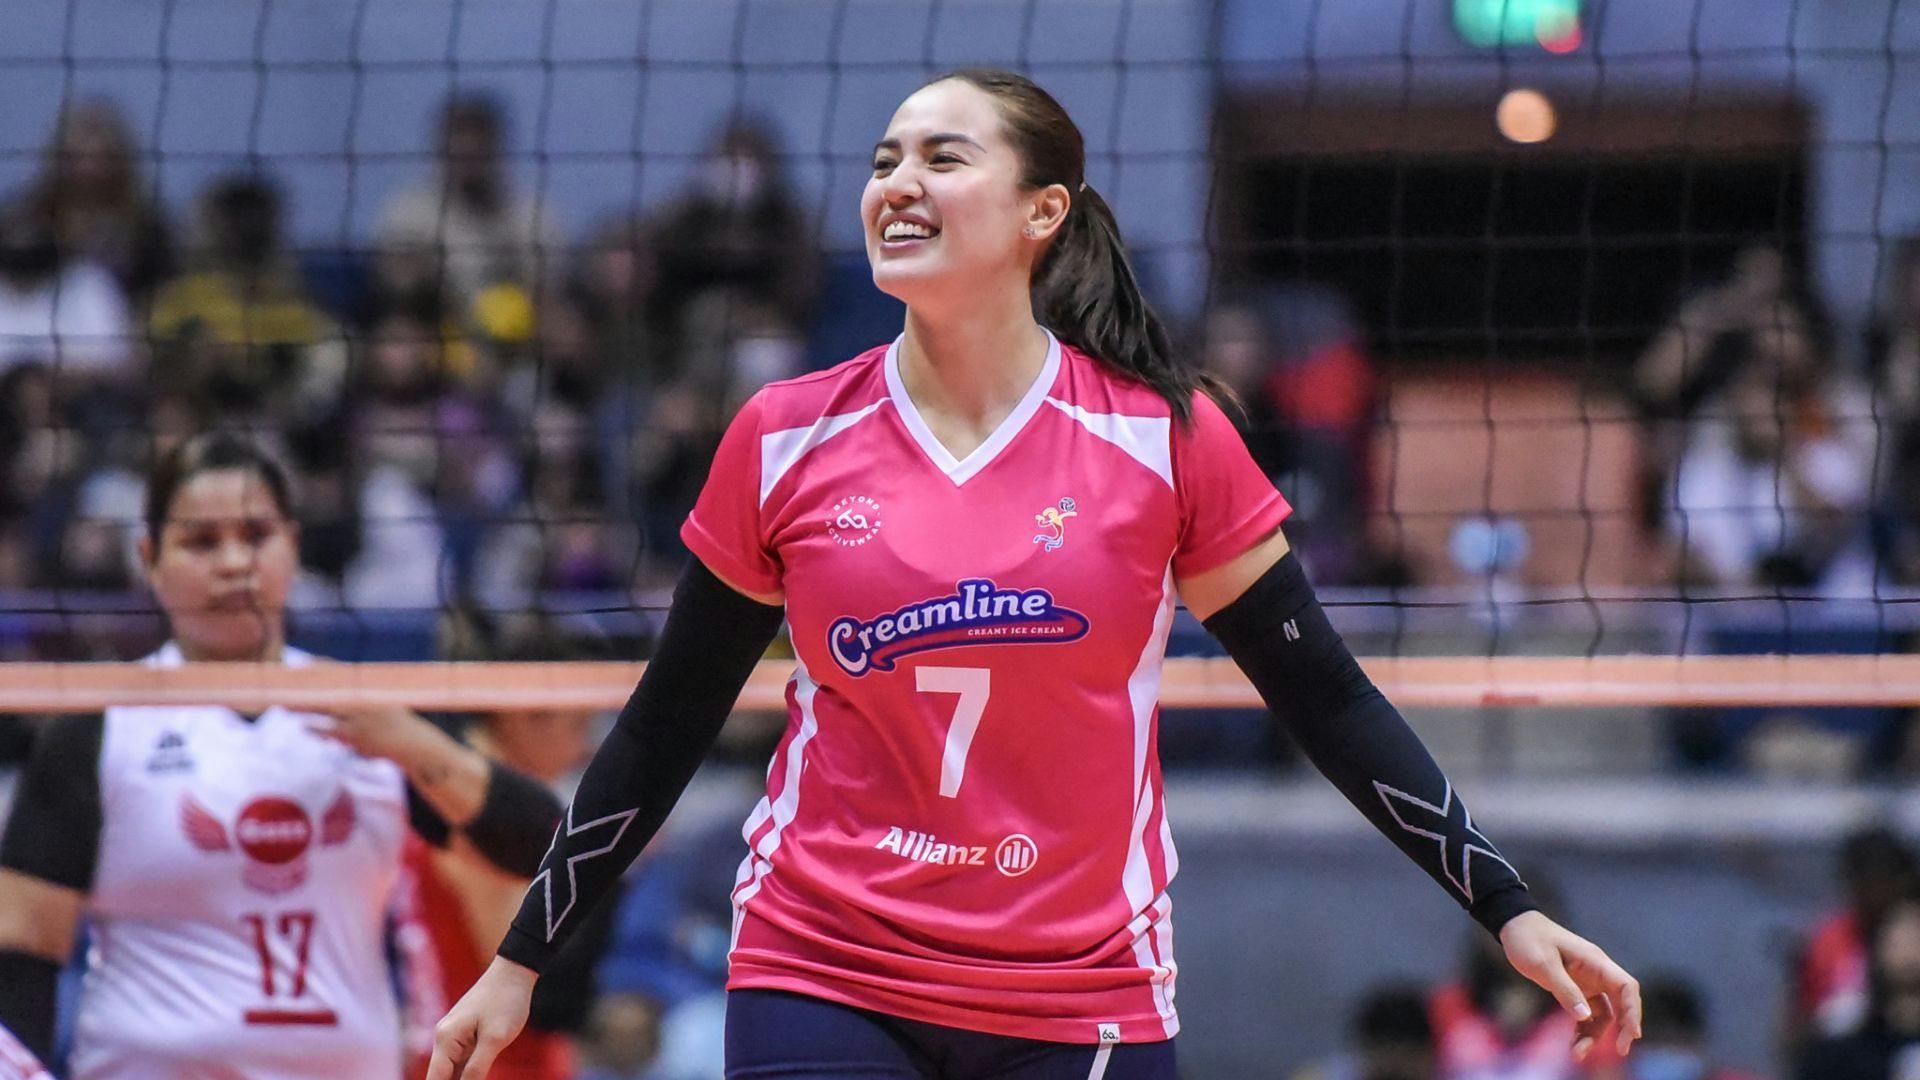 Creamline shows off depth, resilience in opening day win